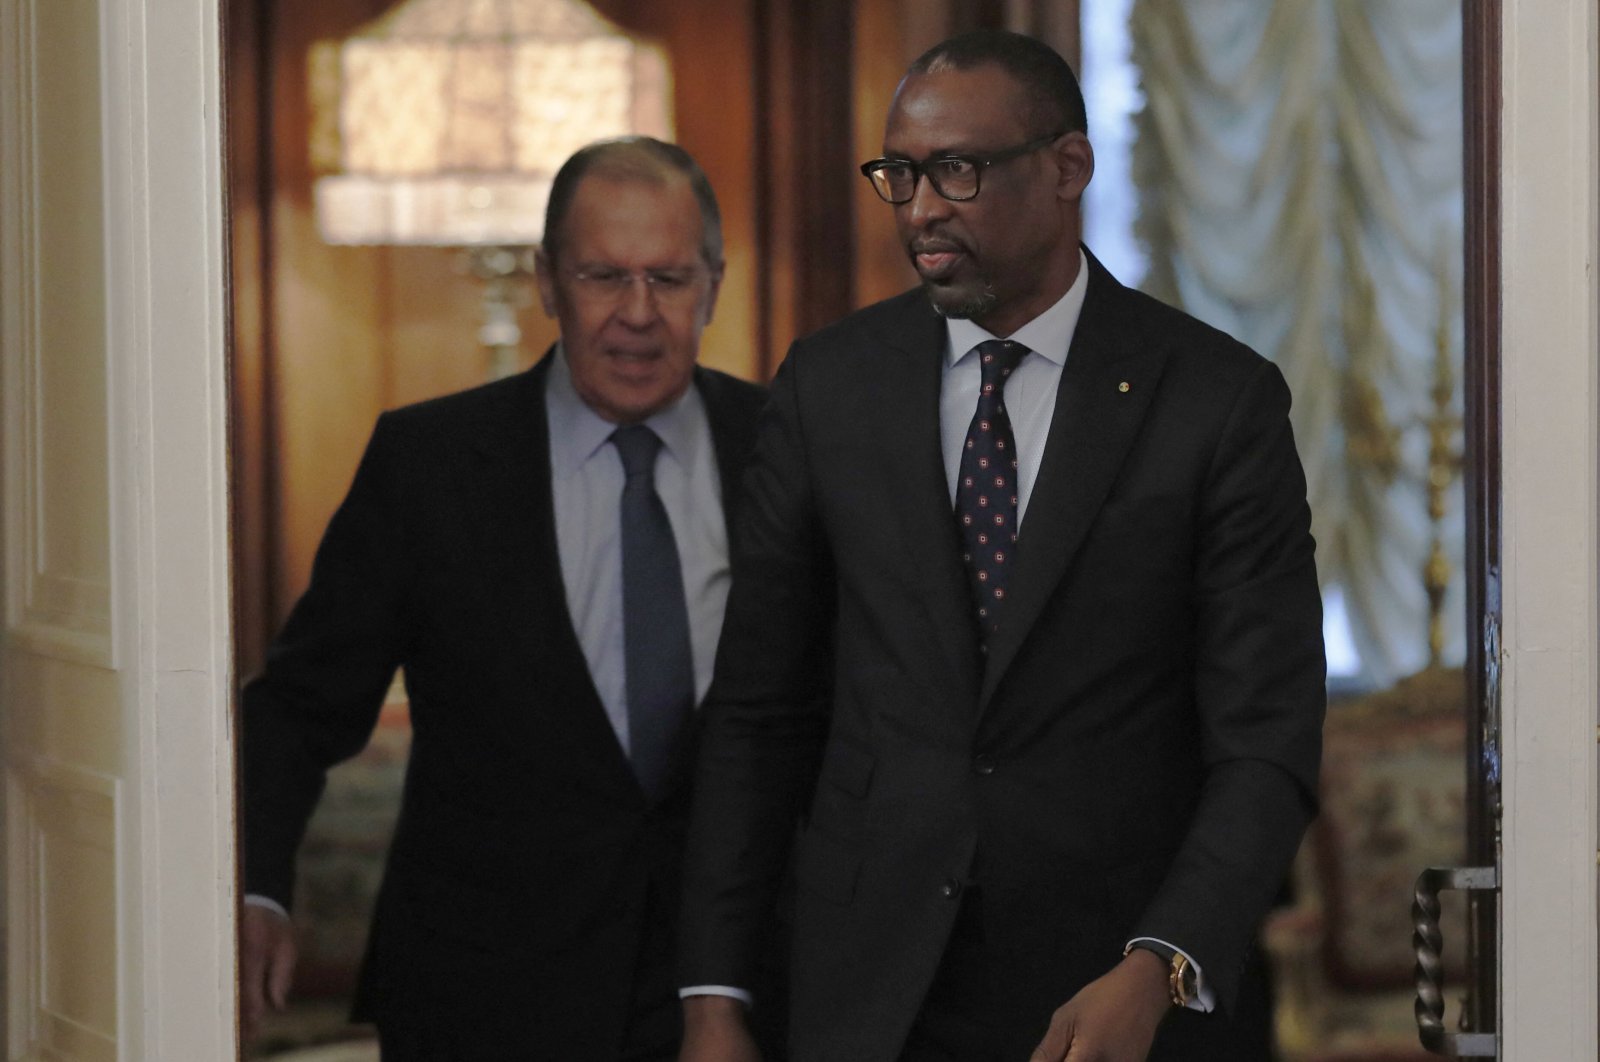 Russian Foreign Minister Sergei Lavrov meets with his Malian counterpart Abdoulaye Diop in Moscow, Russia, Nov. 11, 2021. (AFP Photo)